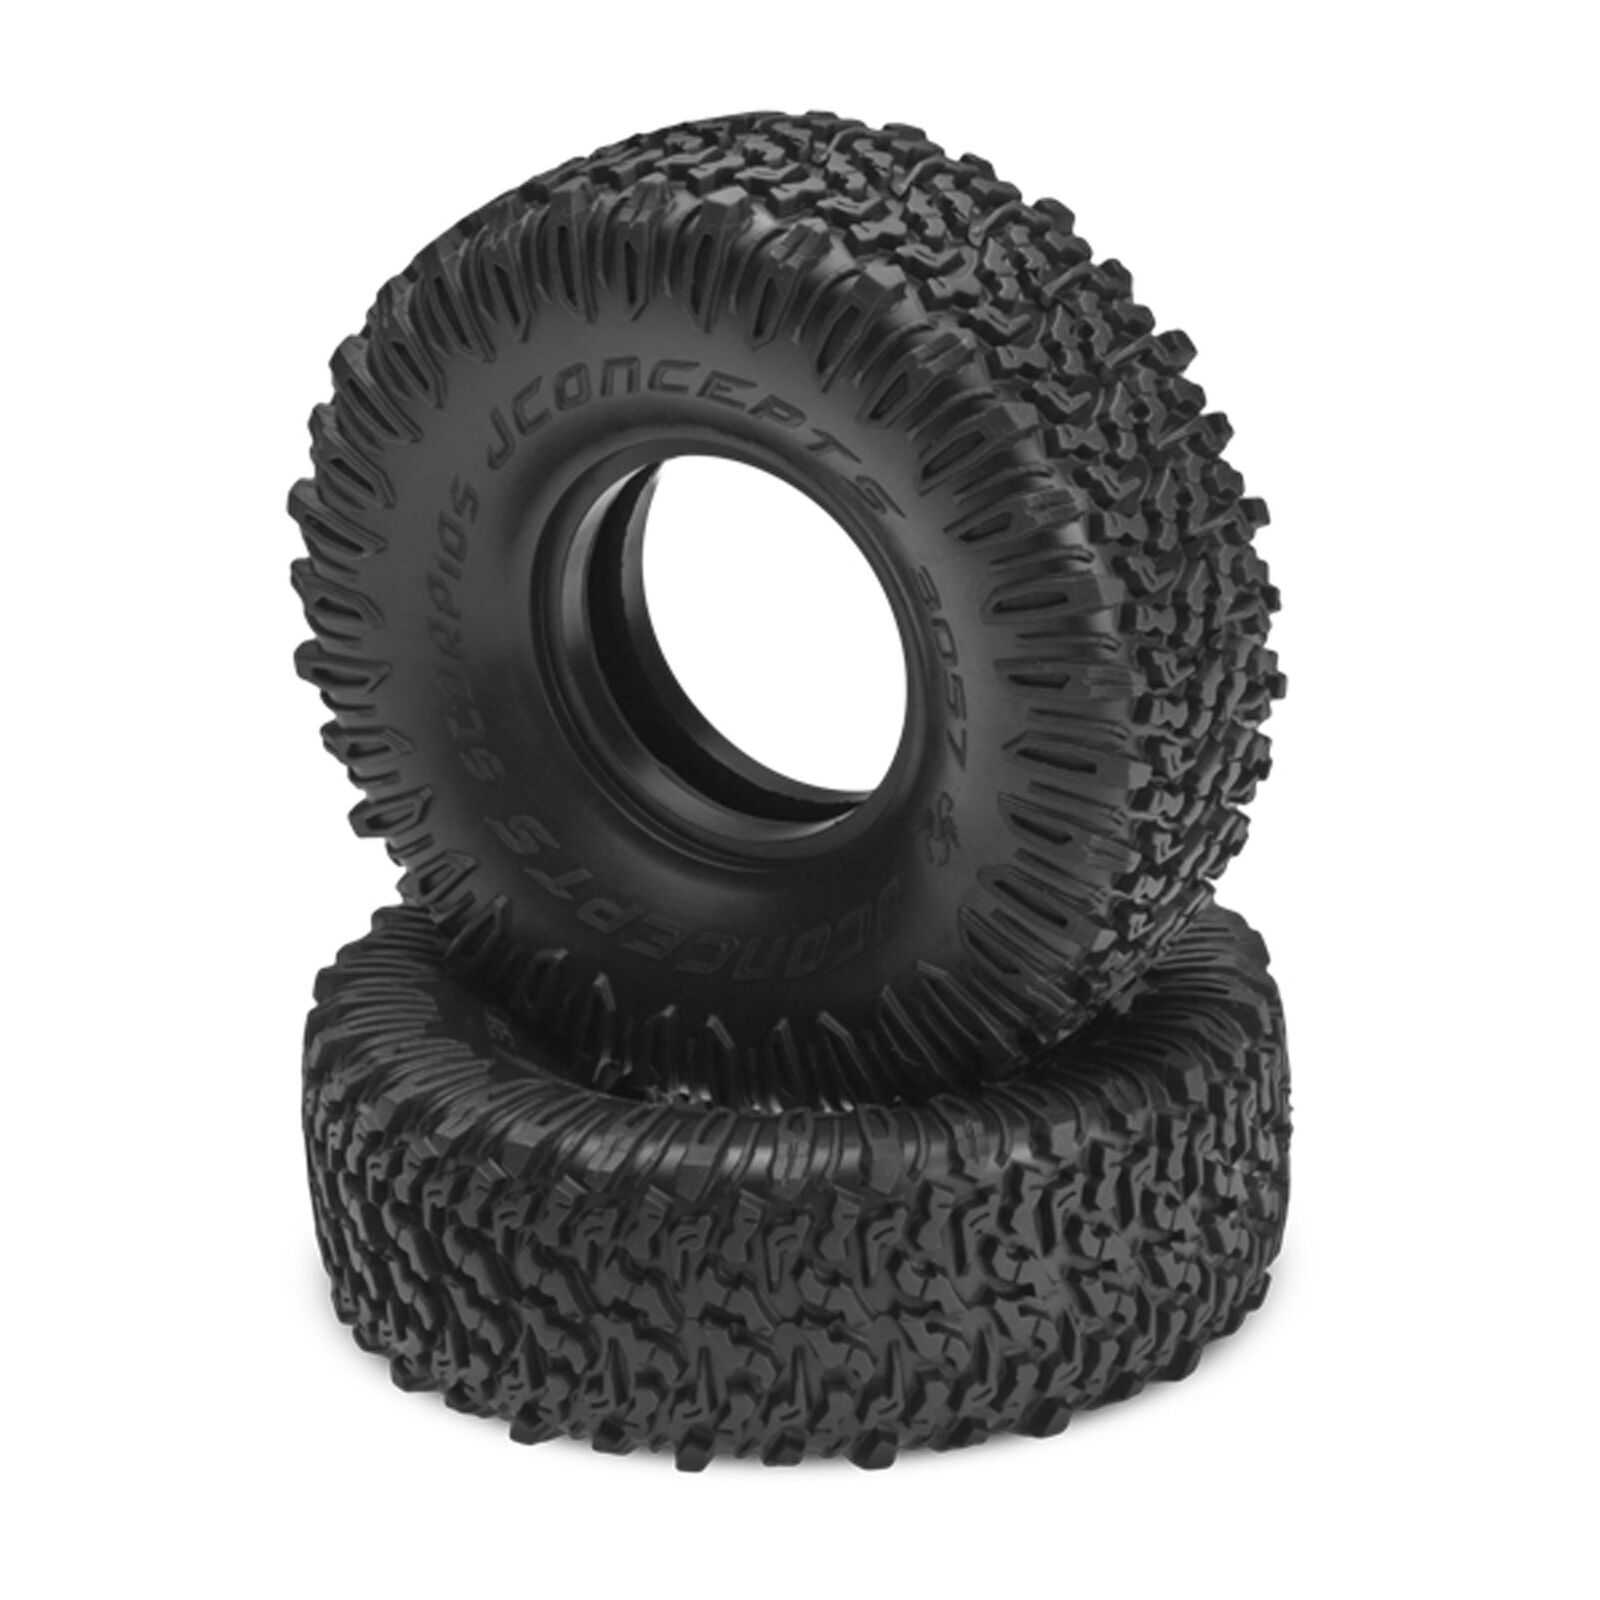 1/10 Scorpios All-Terrain Scaling 1.9” Crawler Tires with Inserts, Green Compound (2)